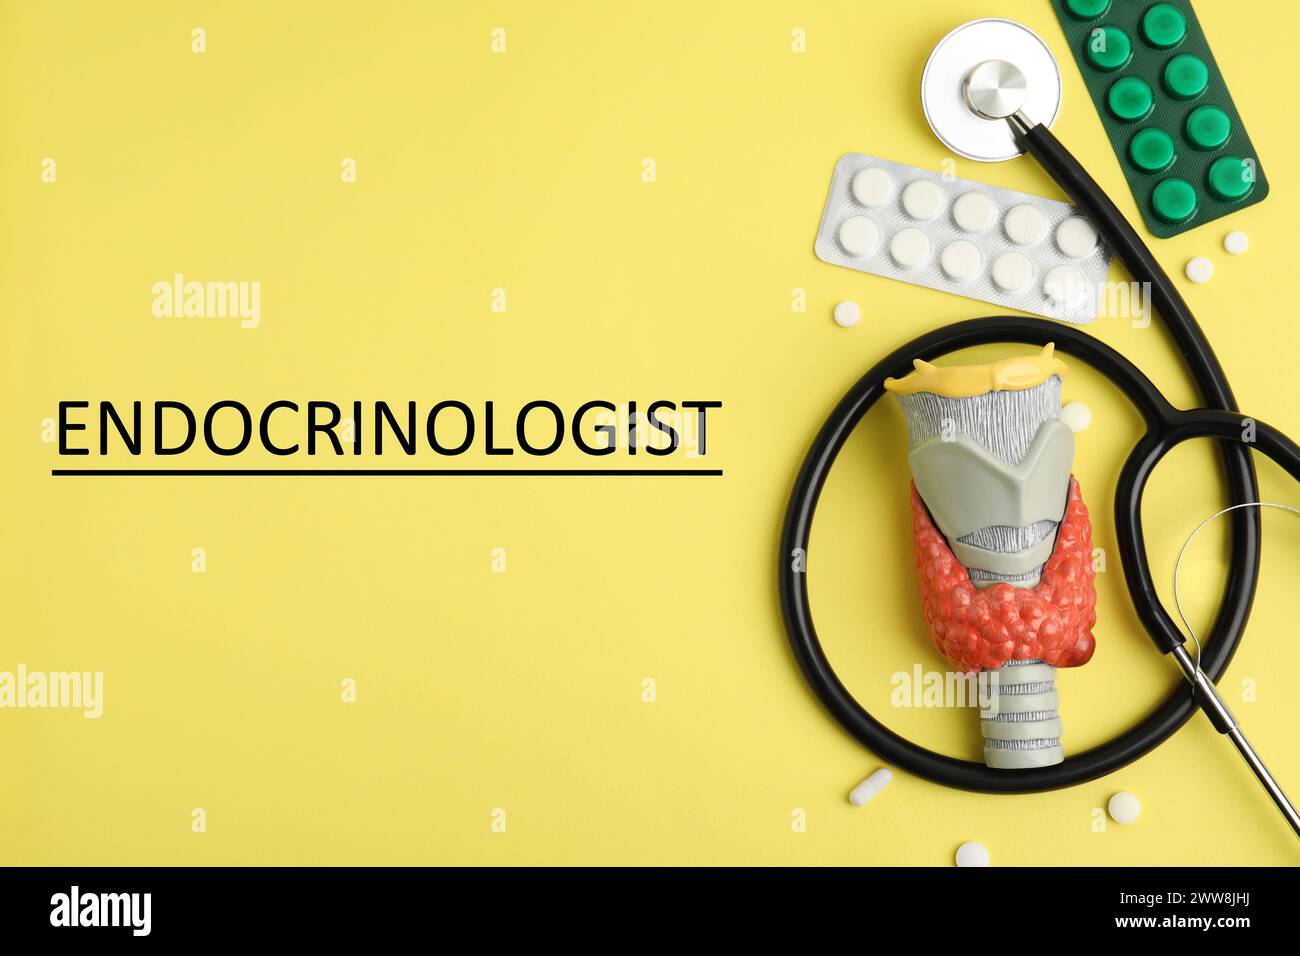 Endocrinologist. Model of thyroid gland, stethoscope and pills on yellow background, flat lay Stock Photo